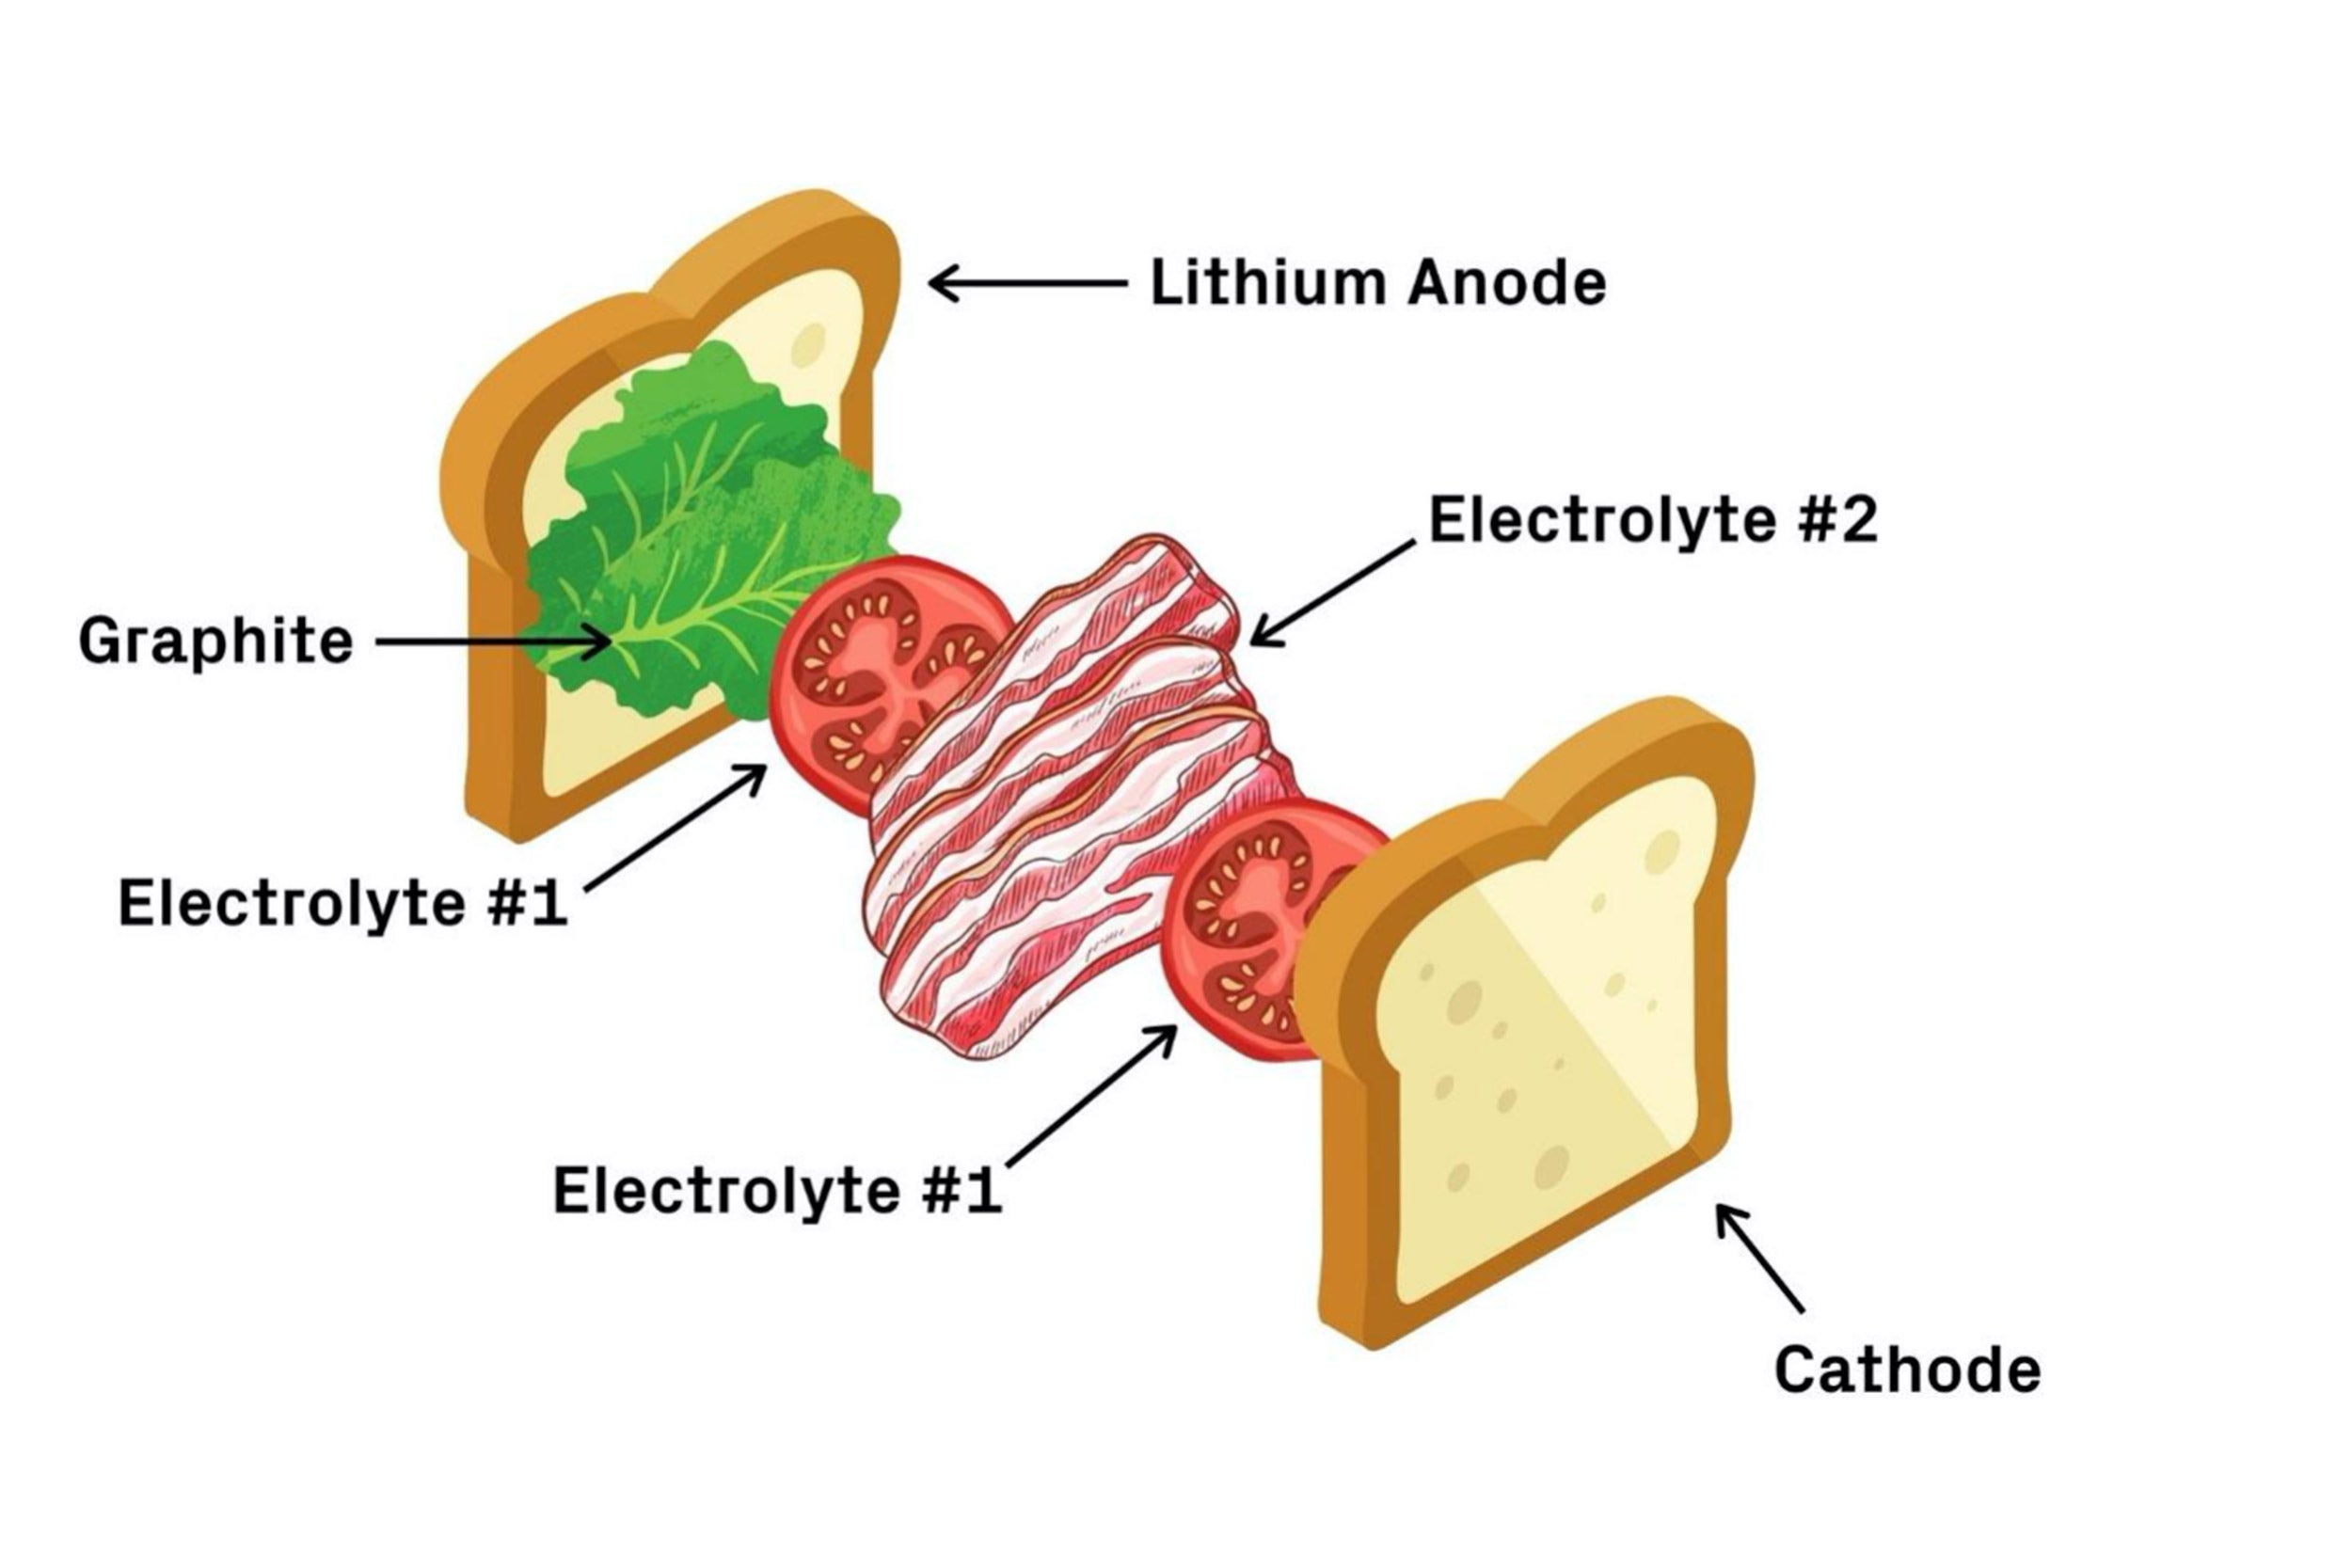 Graphic comparing new battery to a BLT sandwich.